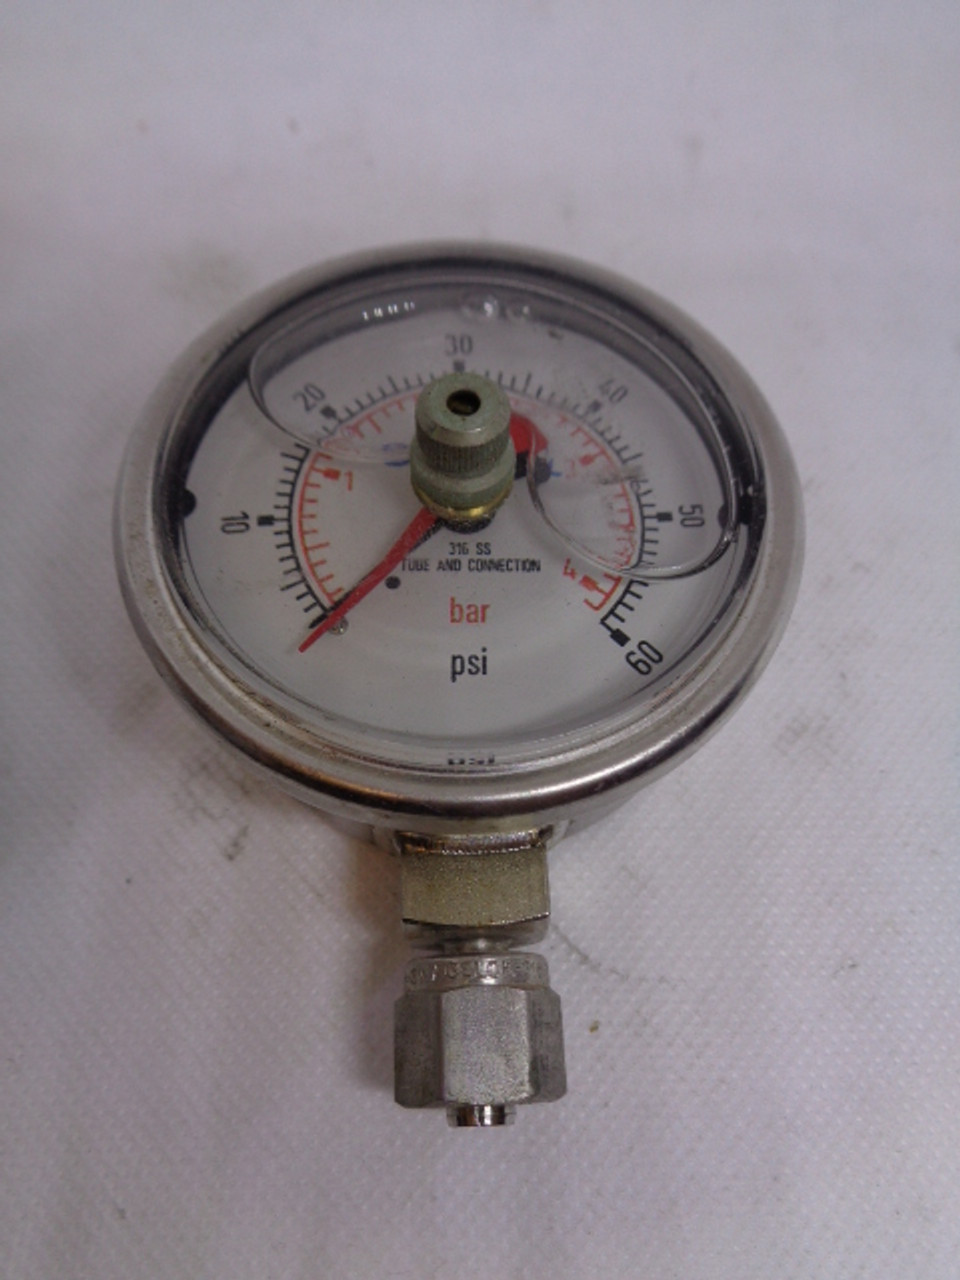 Swagelok 316 SS Tube & Connection 0-60psi, 0-4bar Pressure Gage